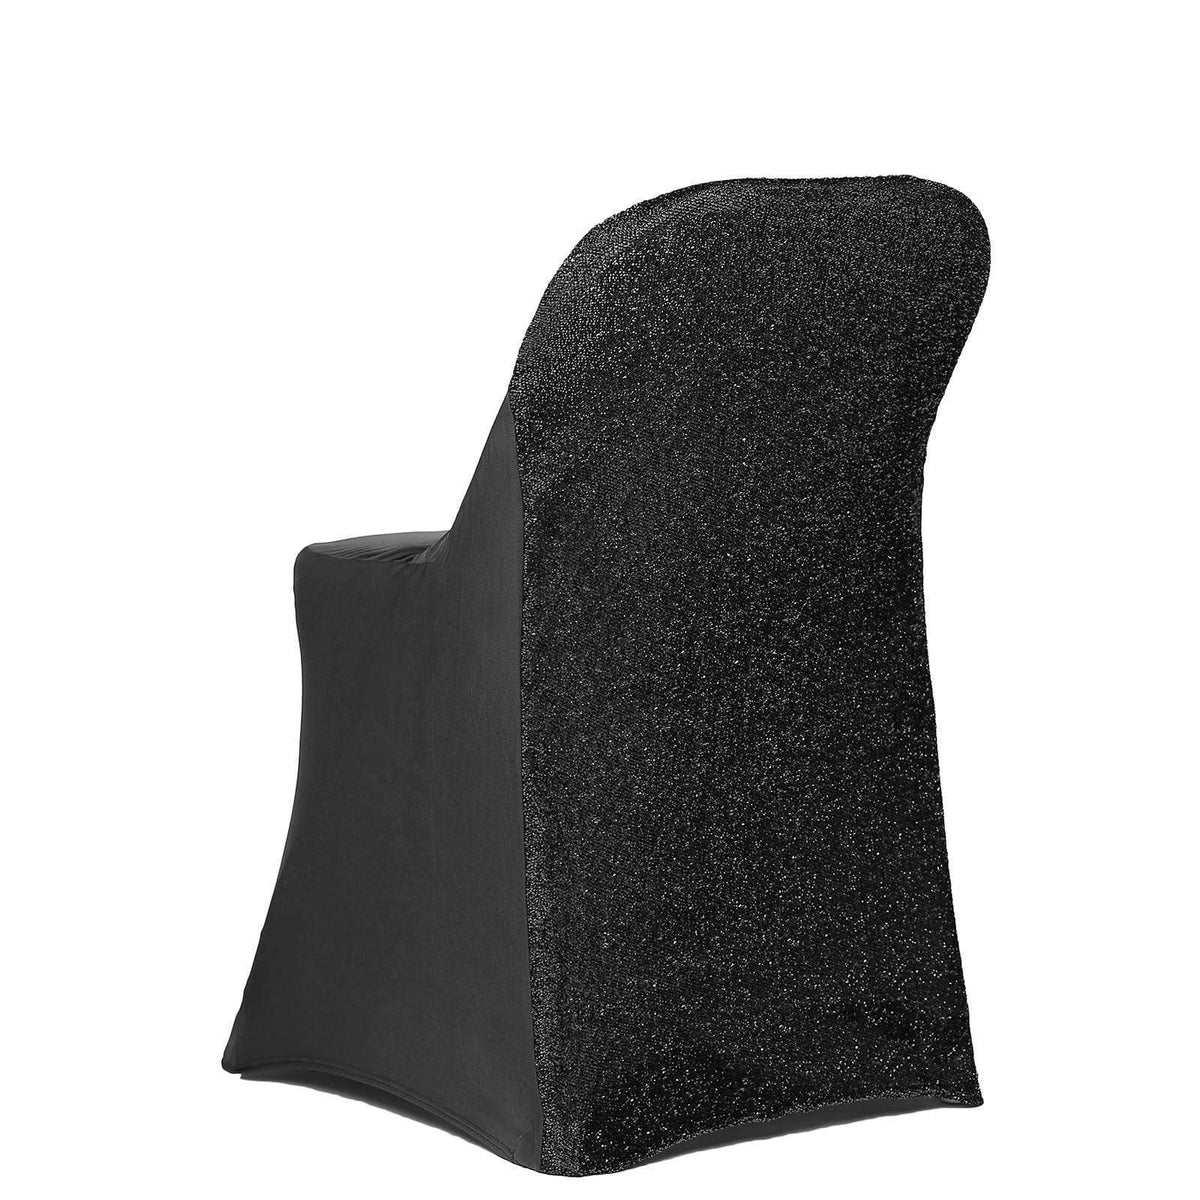 BLACK Fitted 3 Way Open Arch Premium Spandex Folding CHAIR COVER Party  Events